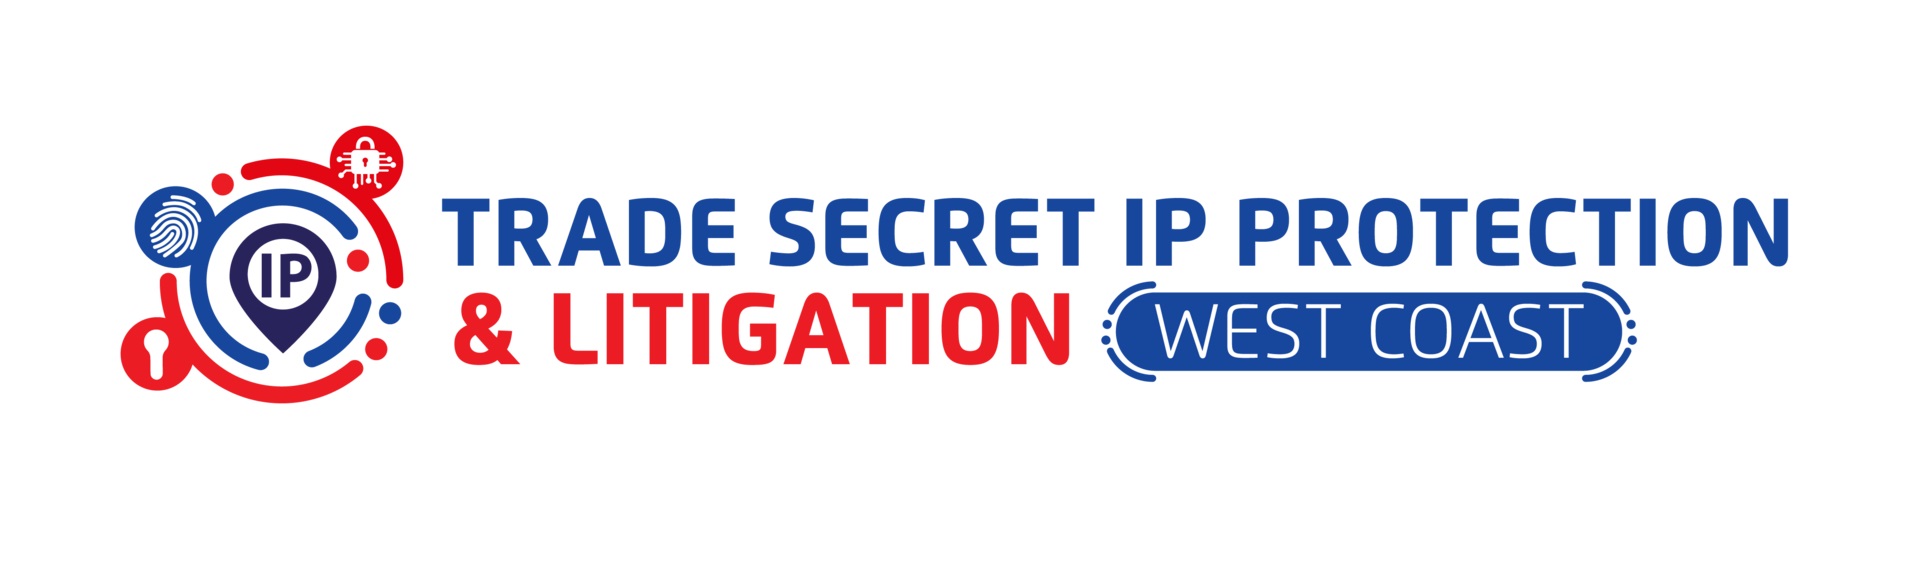 Trade Secret IP Protection and Litigation Conference, San Jose, California, United States